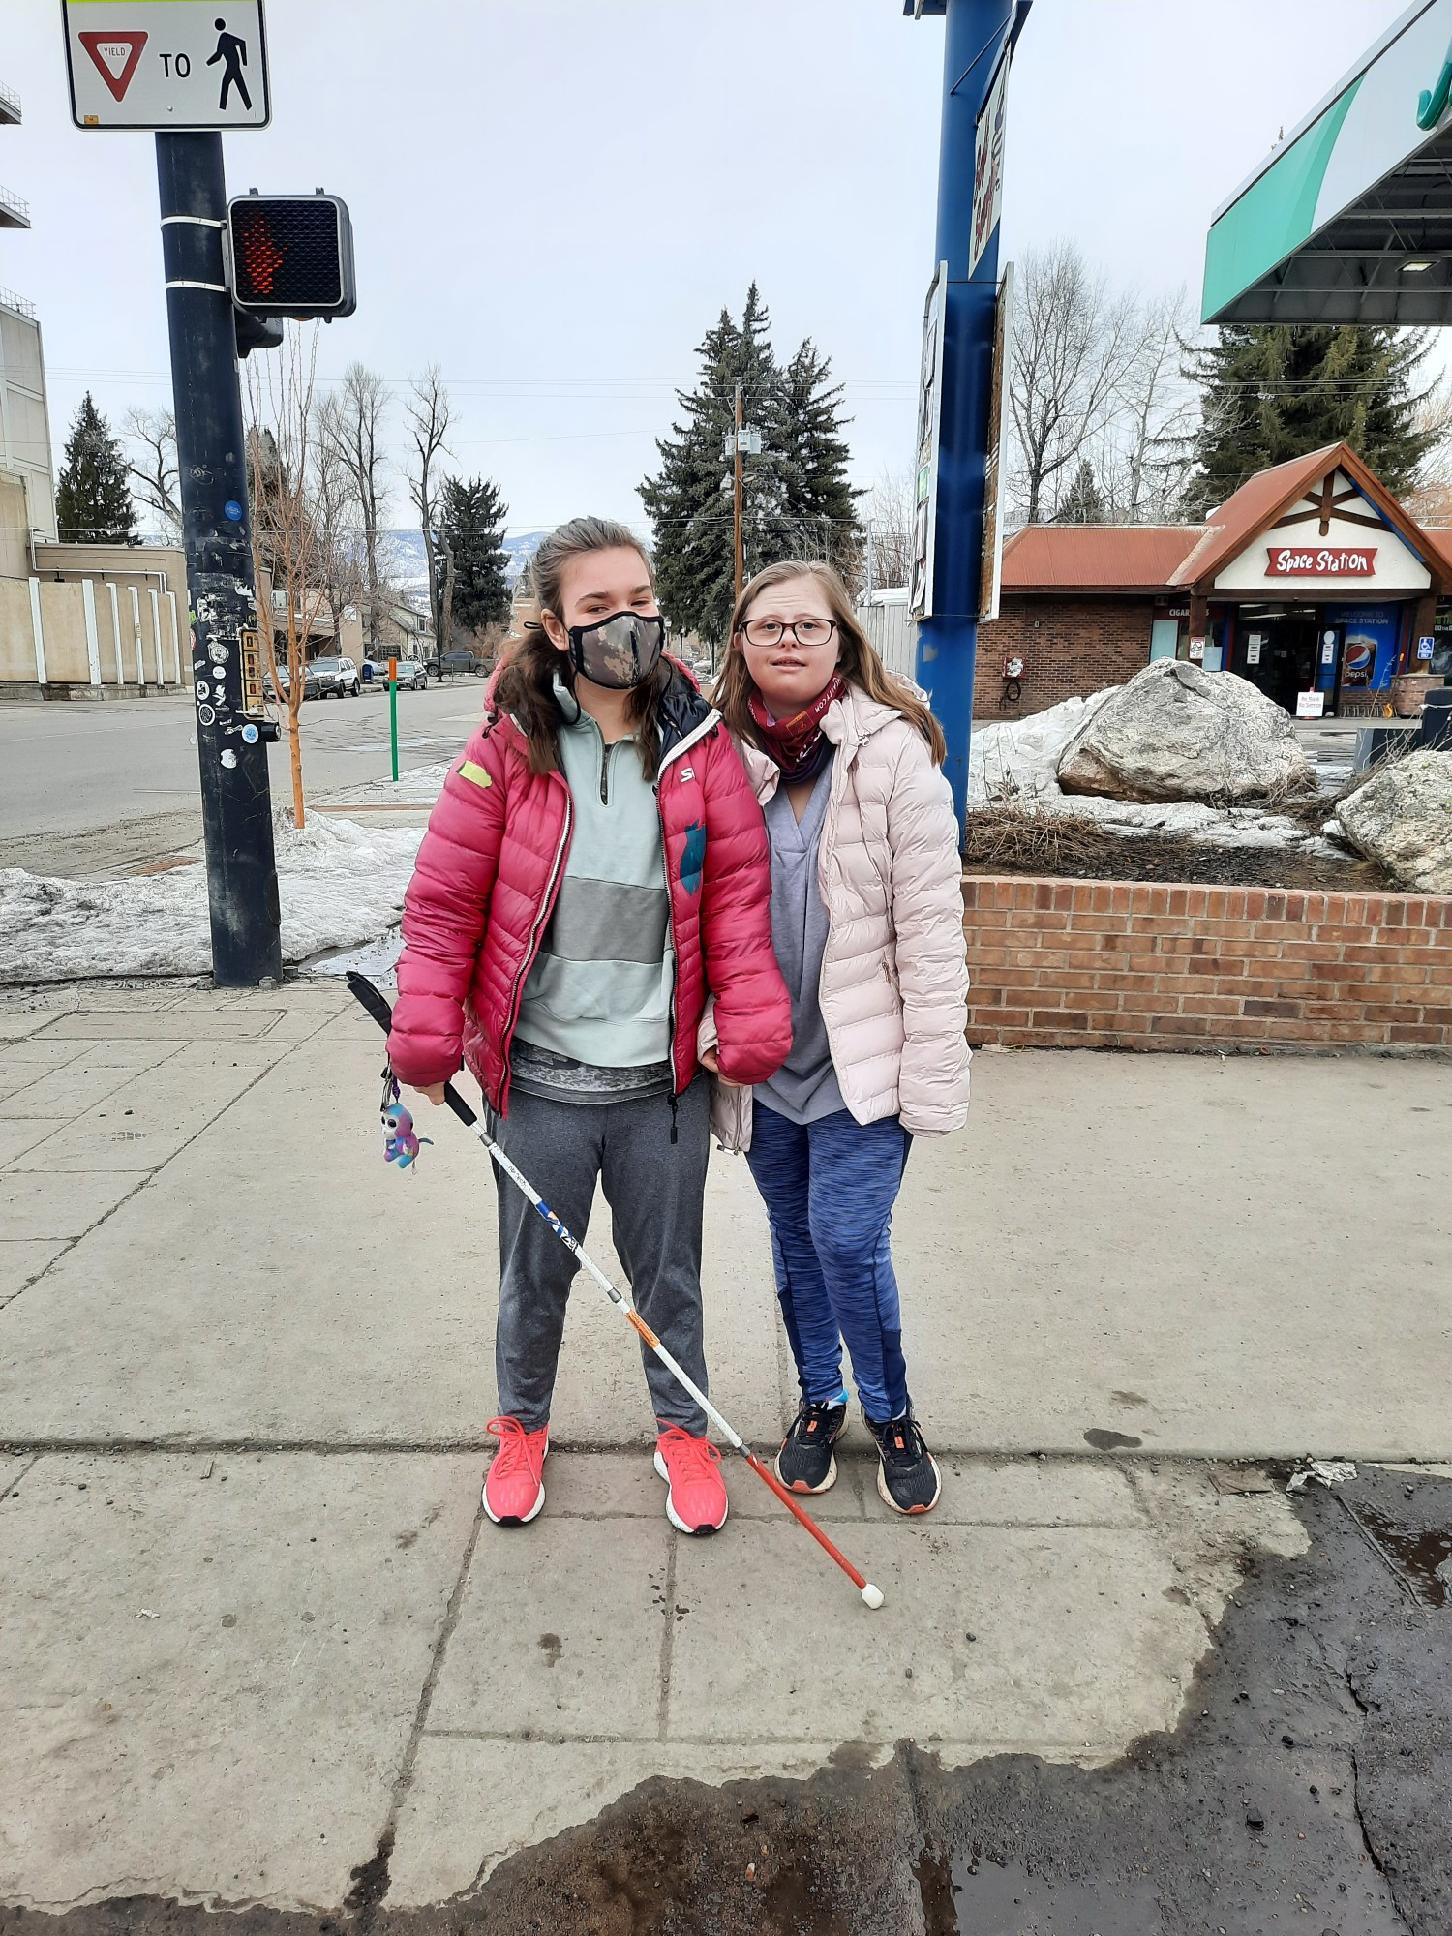 Out and about in downtown Steamboat Springs